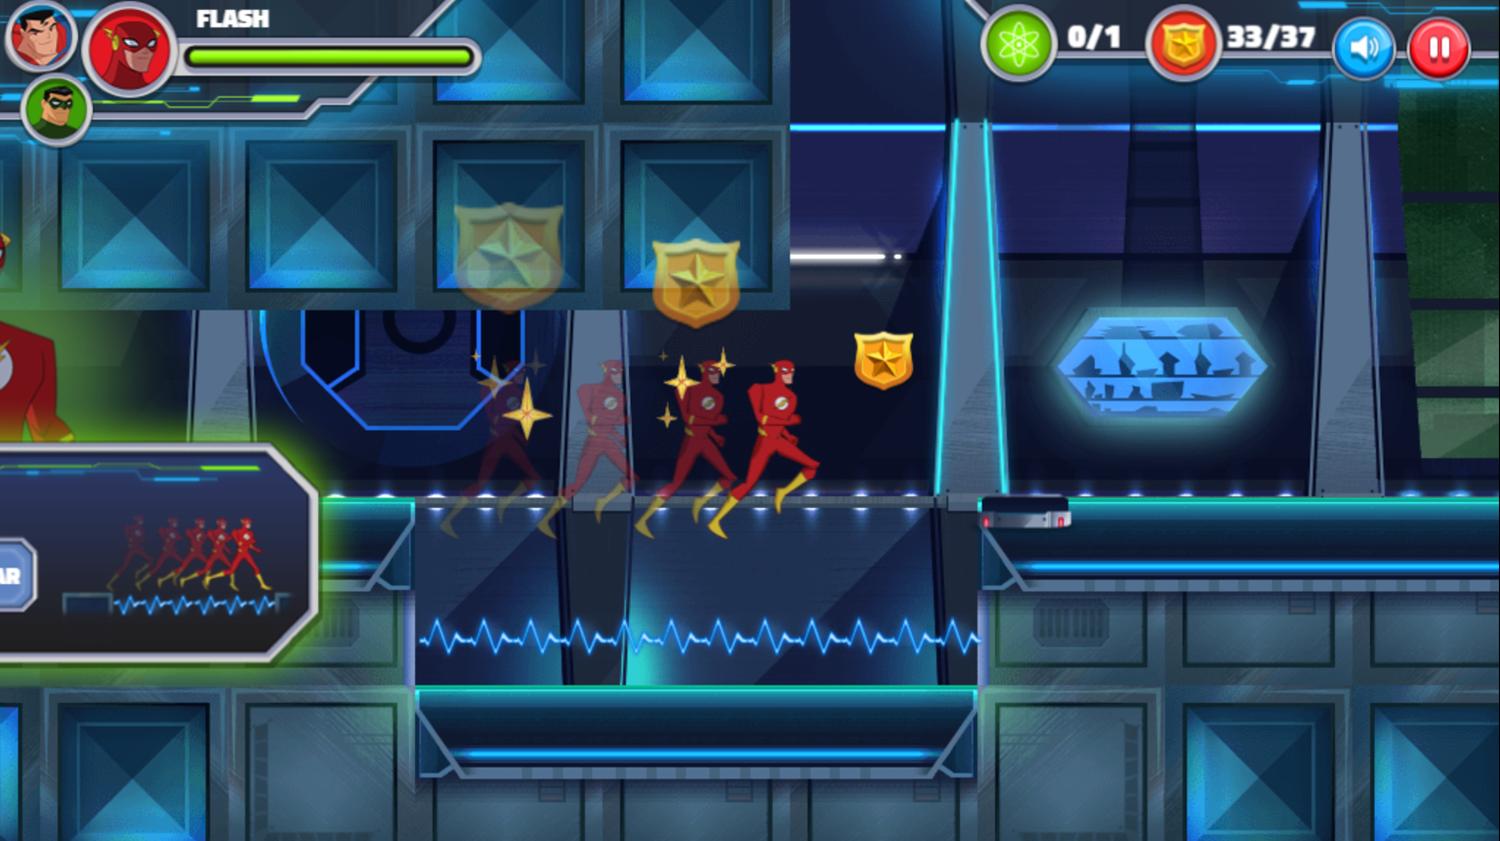 Justice League Action Nuclear Rescue Game Flash Power Screenshot.